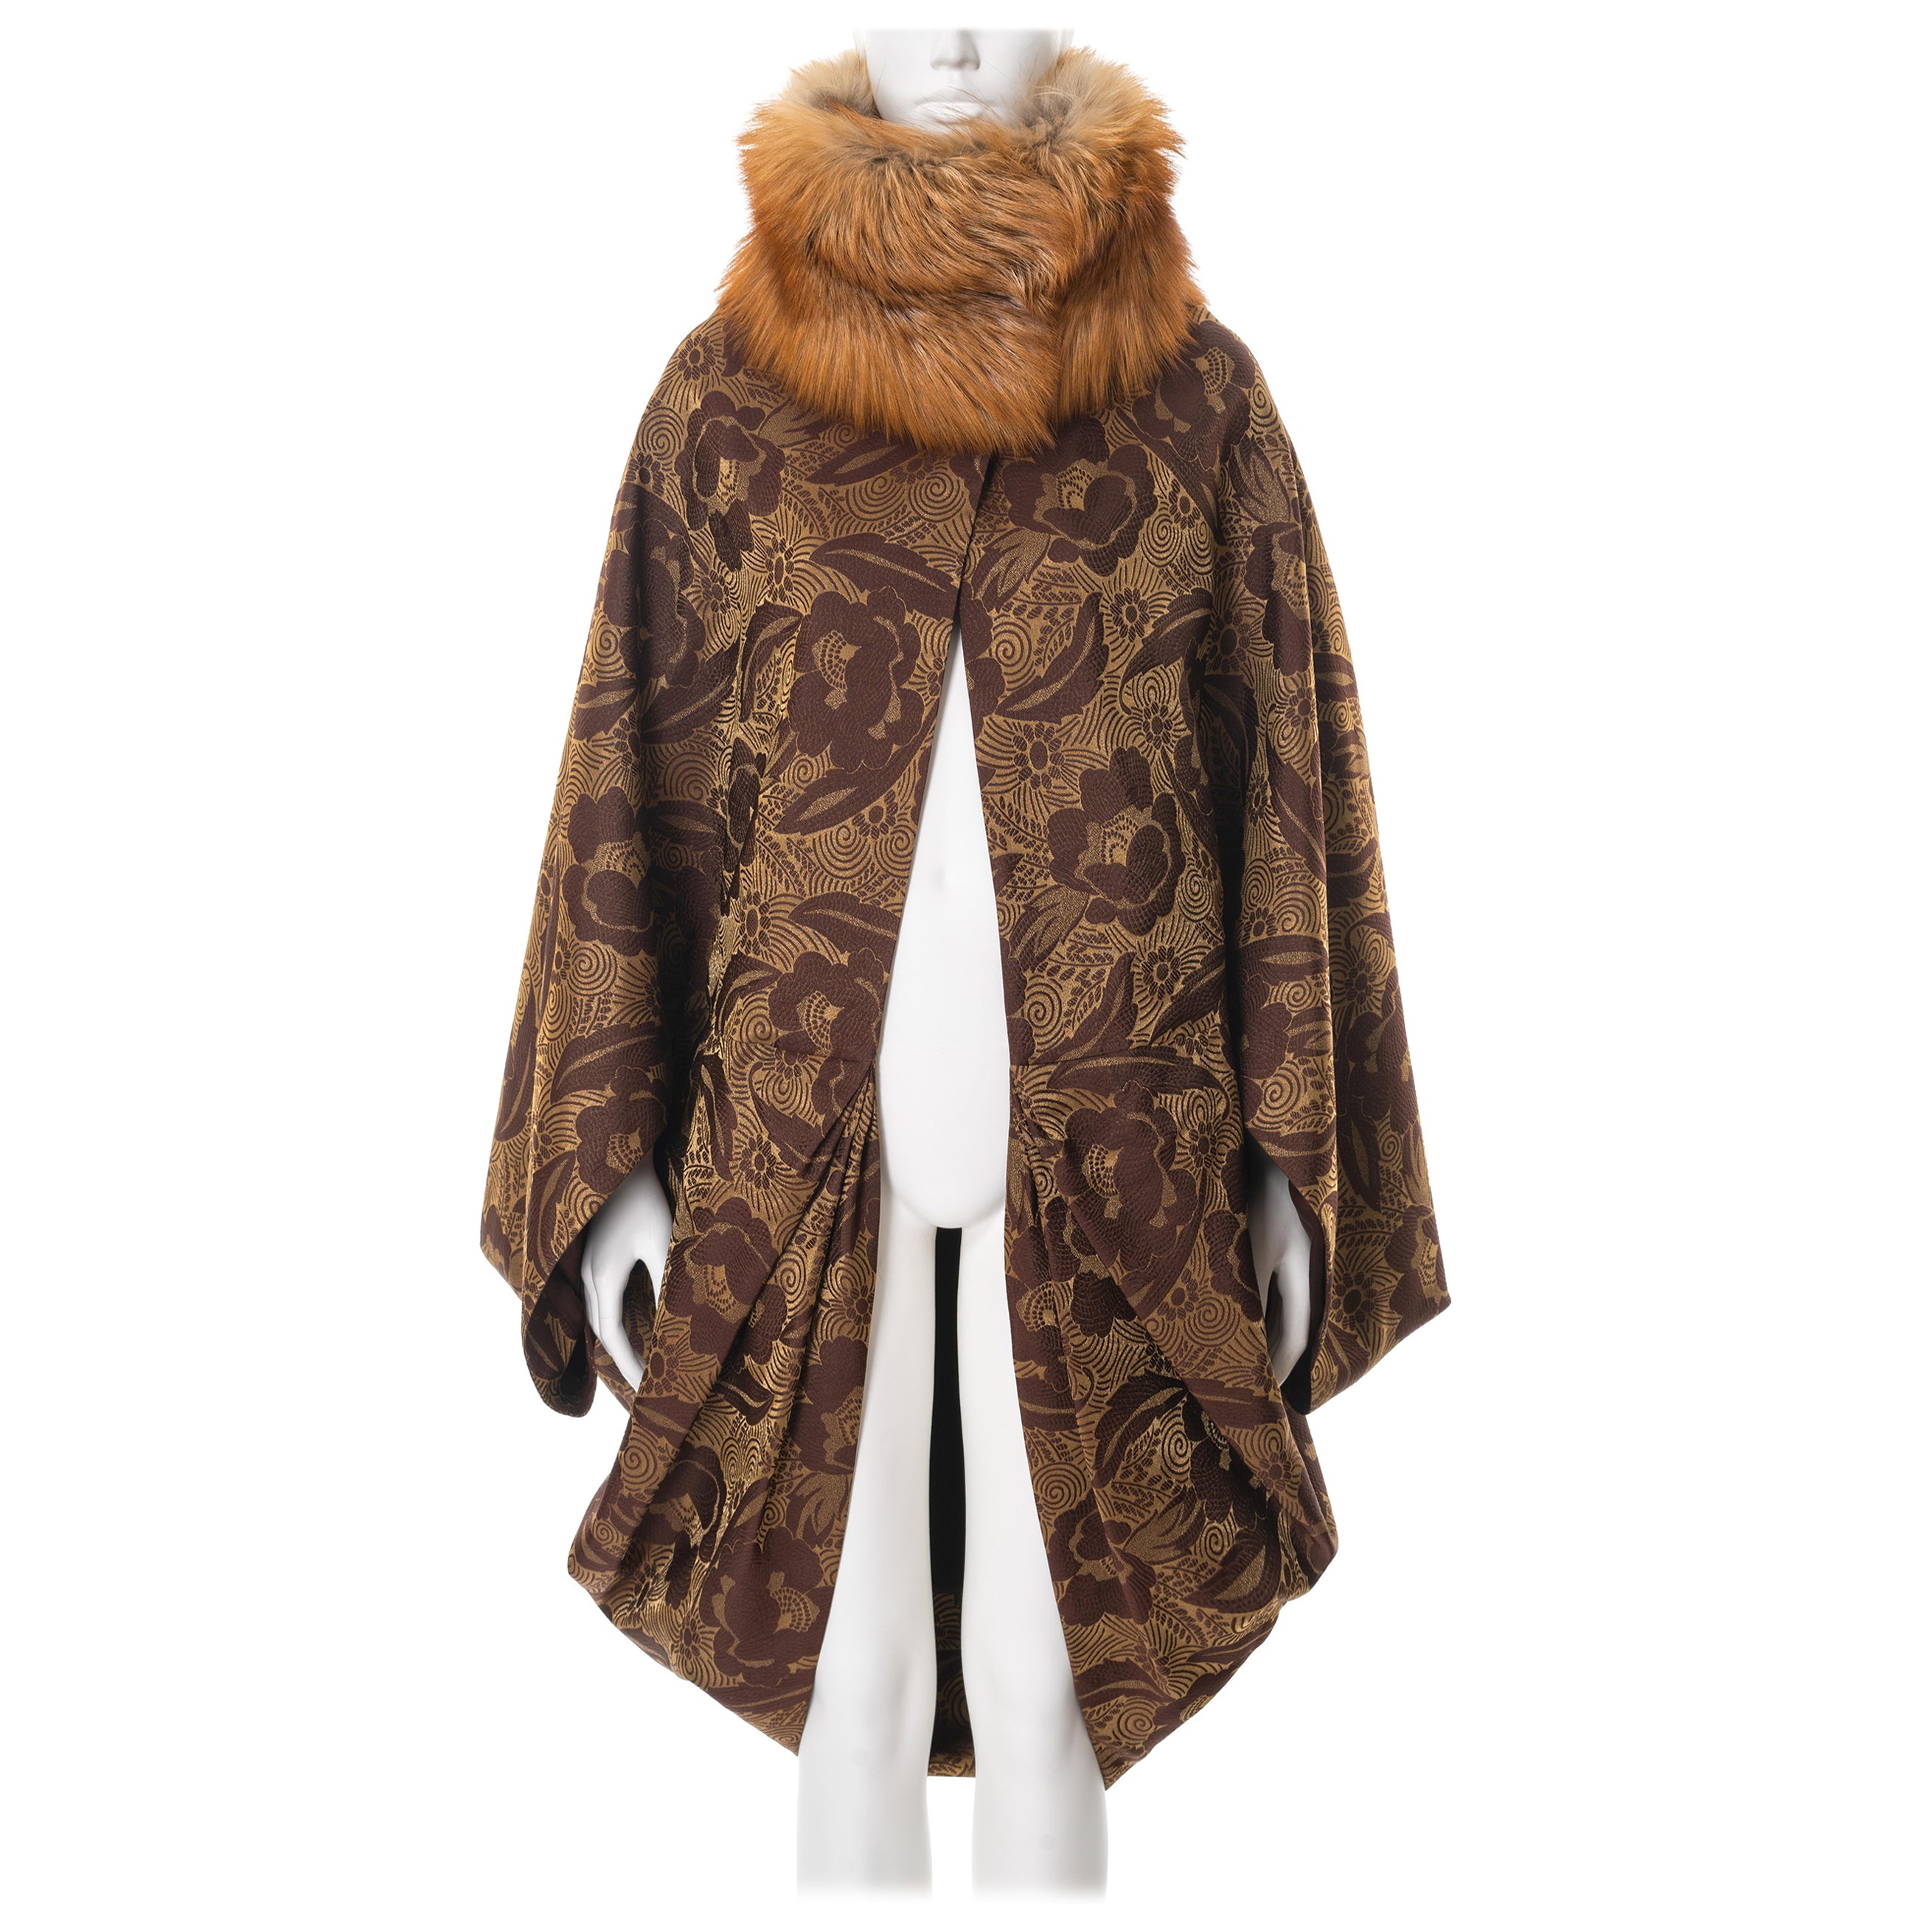 Christian Dior by John Galliano silk cocoon coat with fox fur collar, ss 2008 For Sale